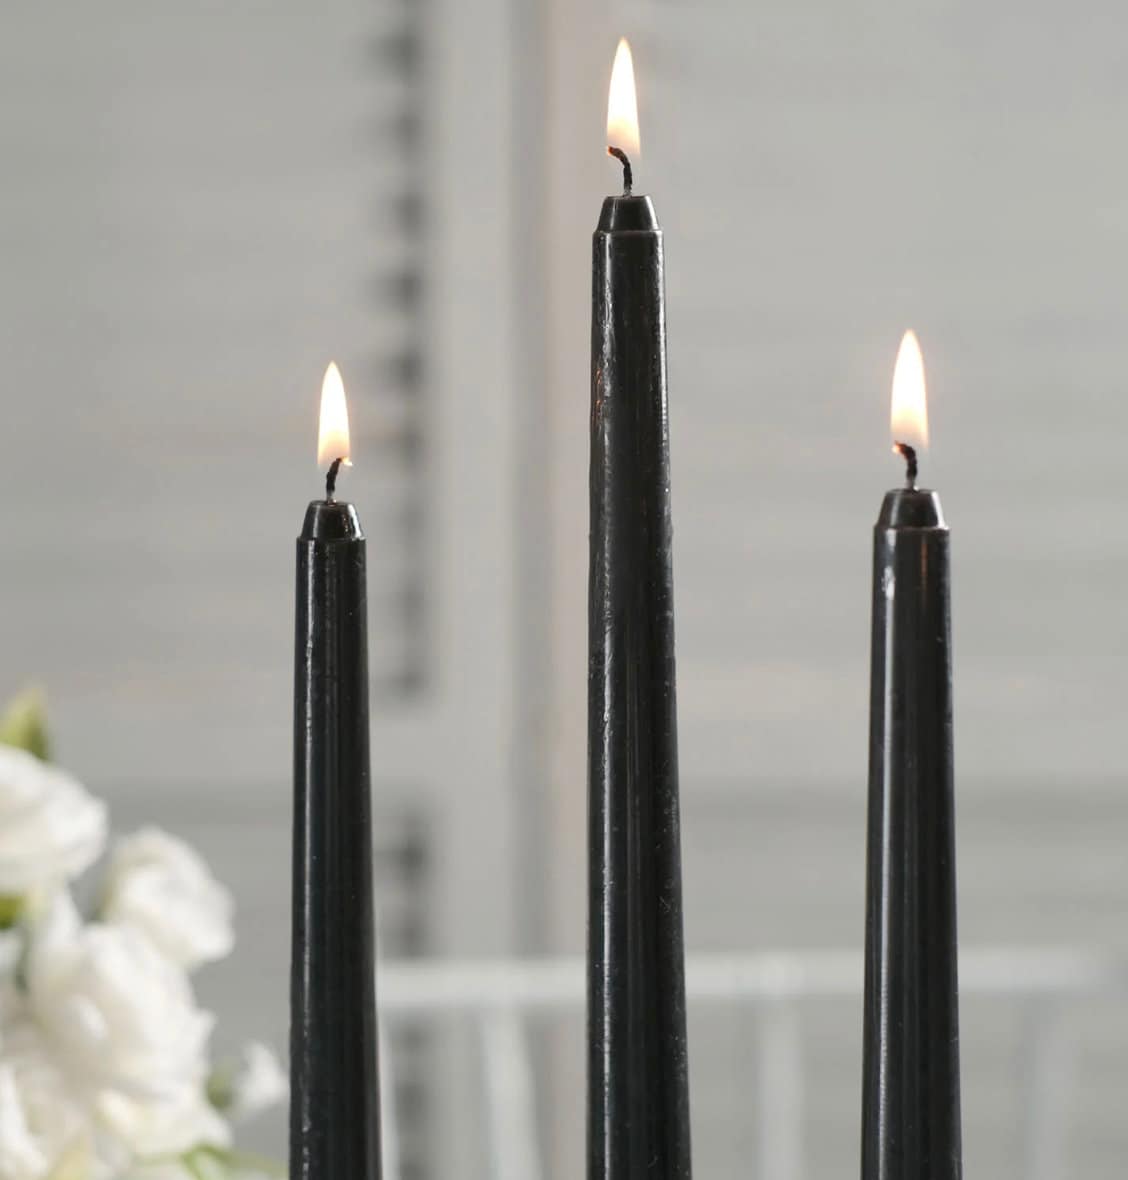 24 Smokeless Black Taper Candles Premium Long Wax Candles Unscented Romantic Wedding Minimal Wholesale Sale Decoration Dripless Gothic